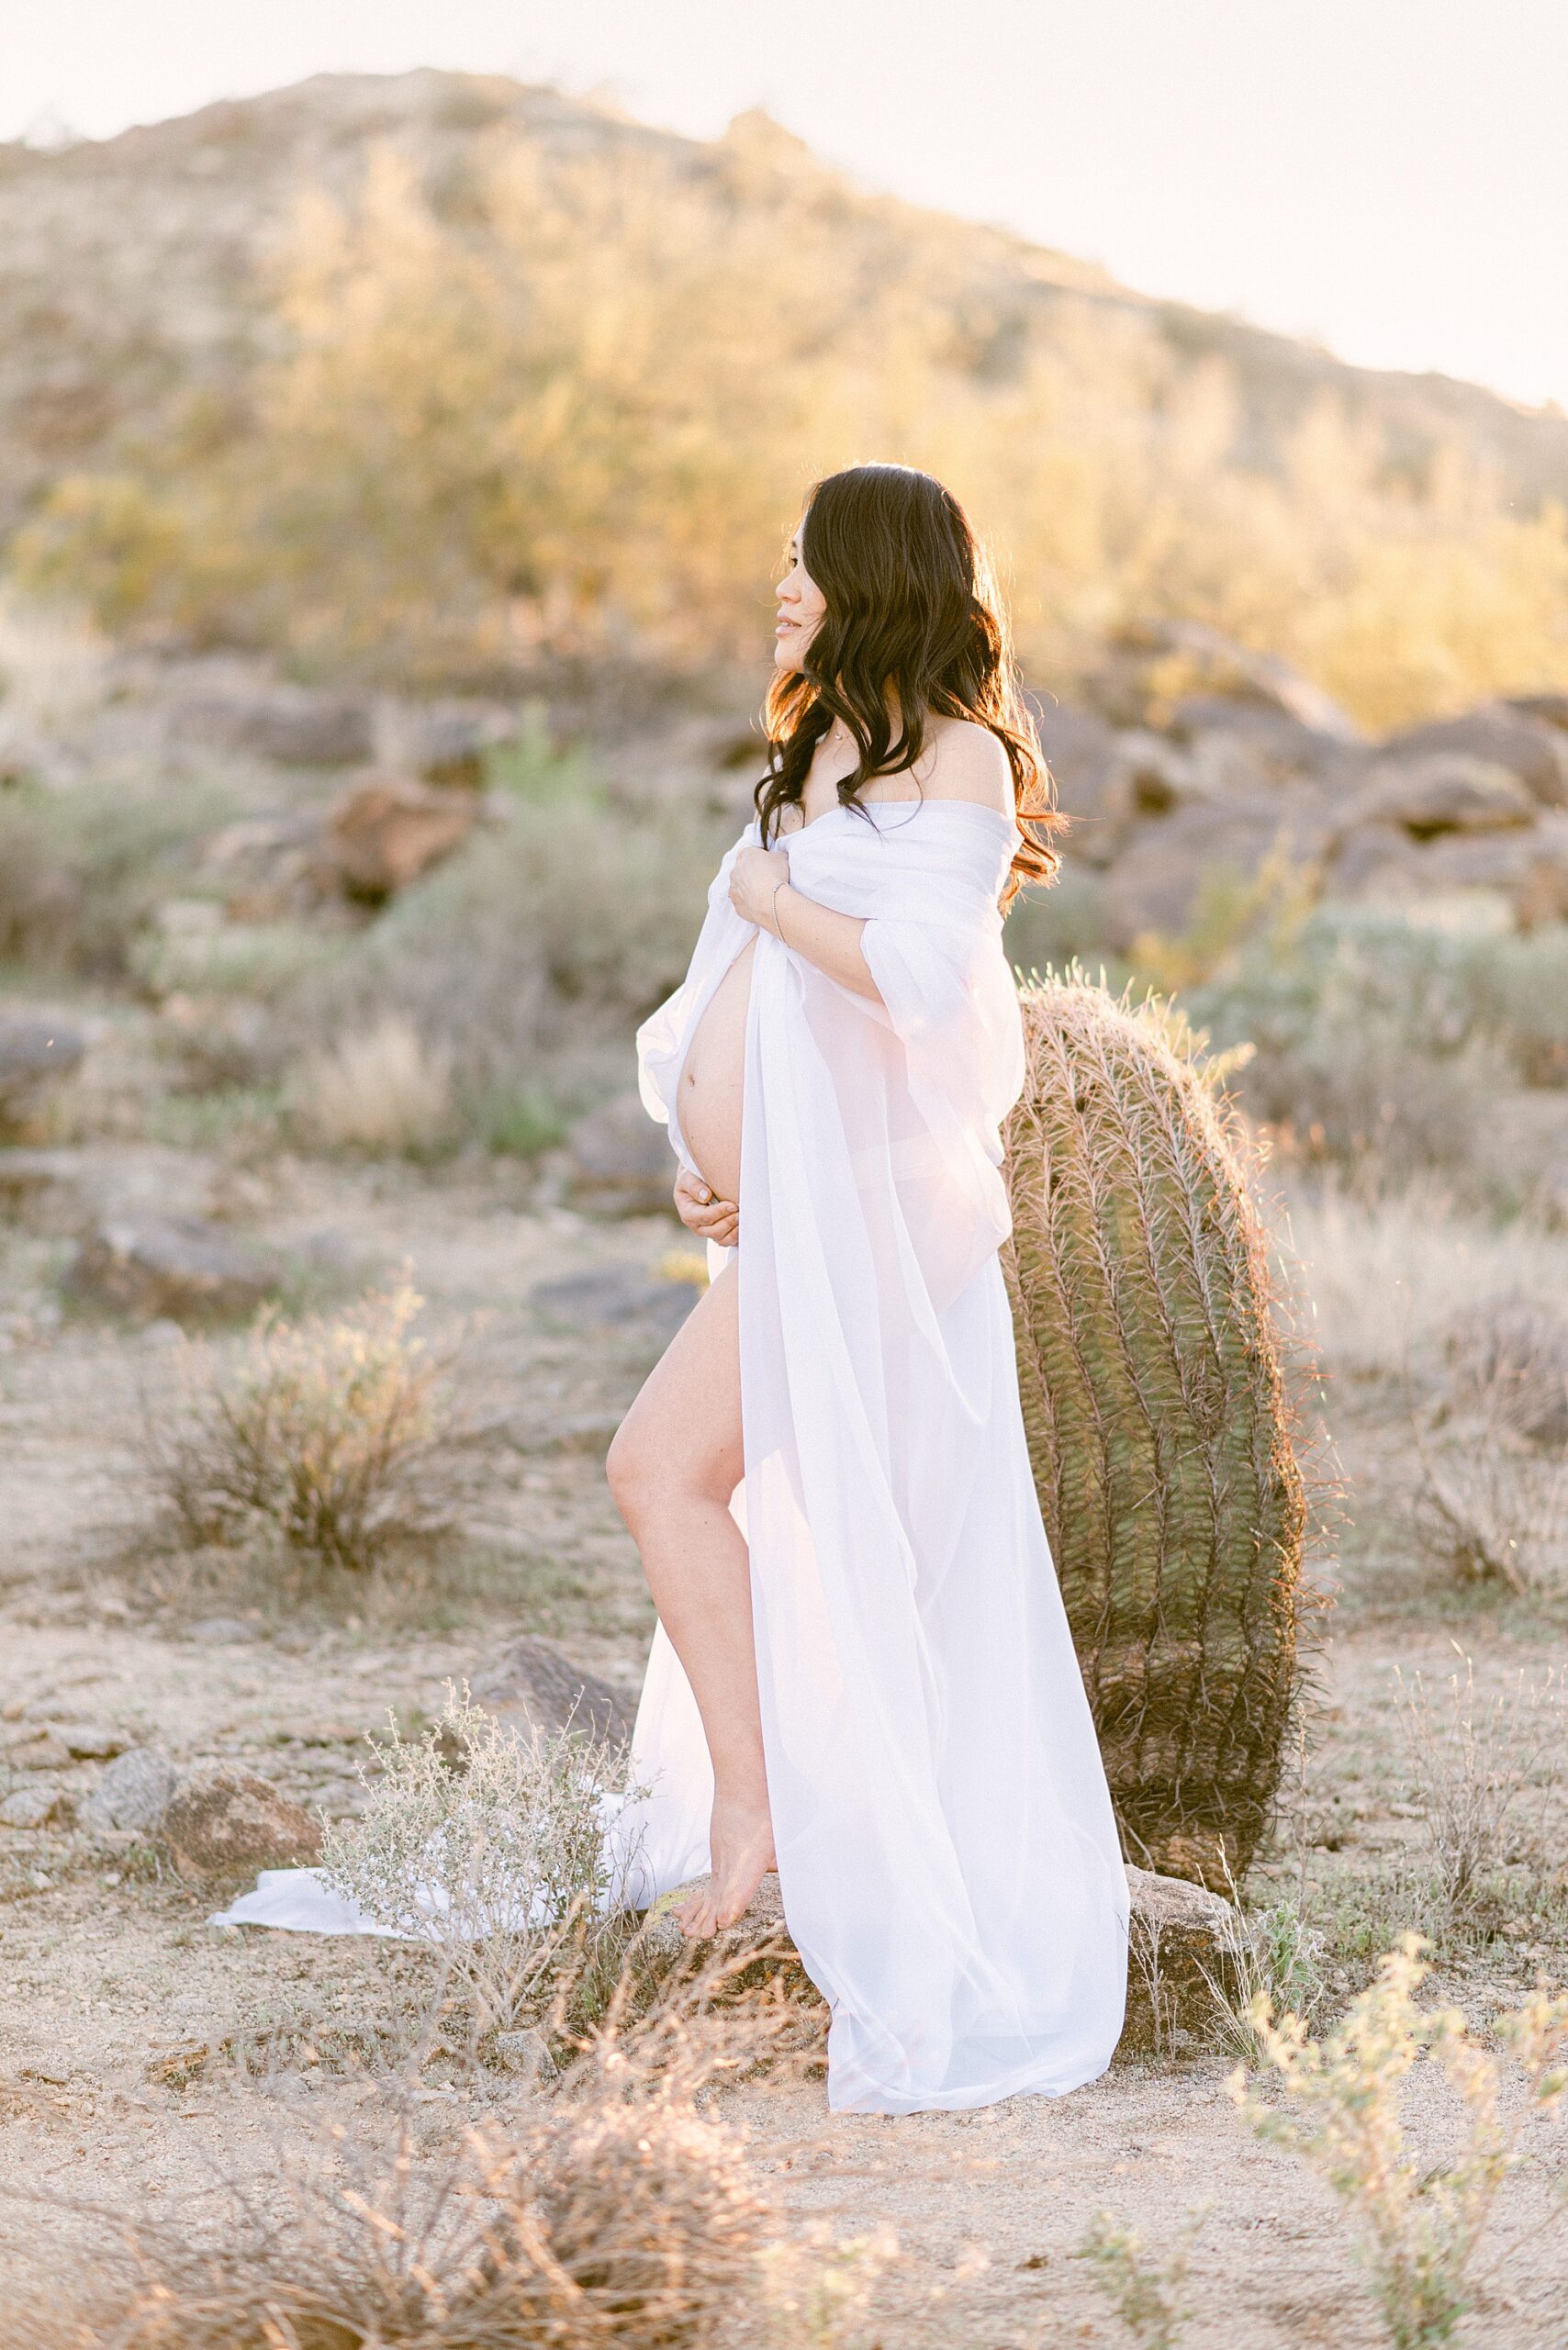 maternity boudoir with chiffon maternity draping fabric. Pregnant woman is standing next to cactus